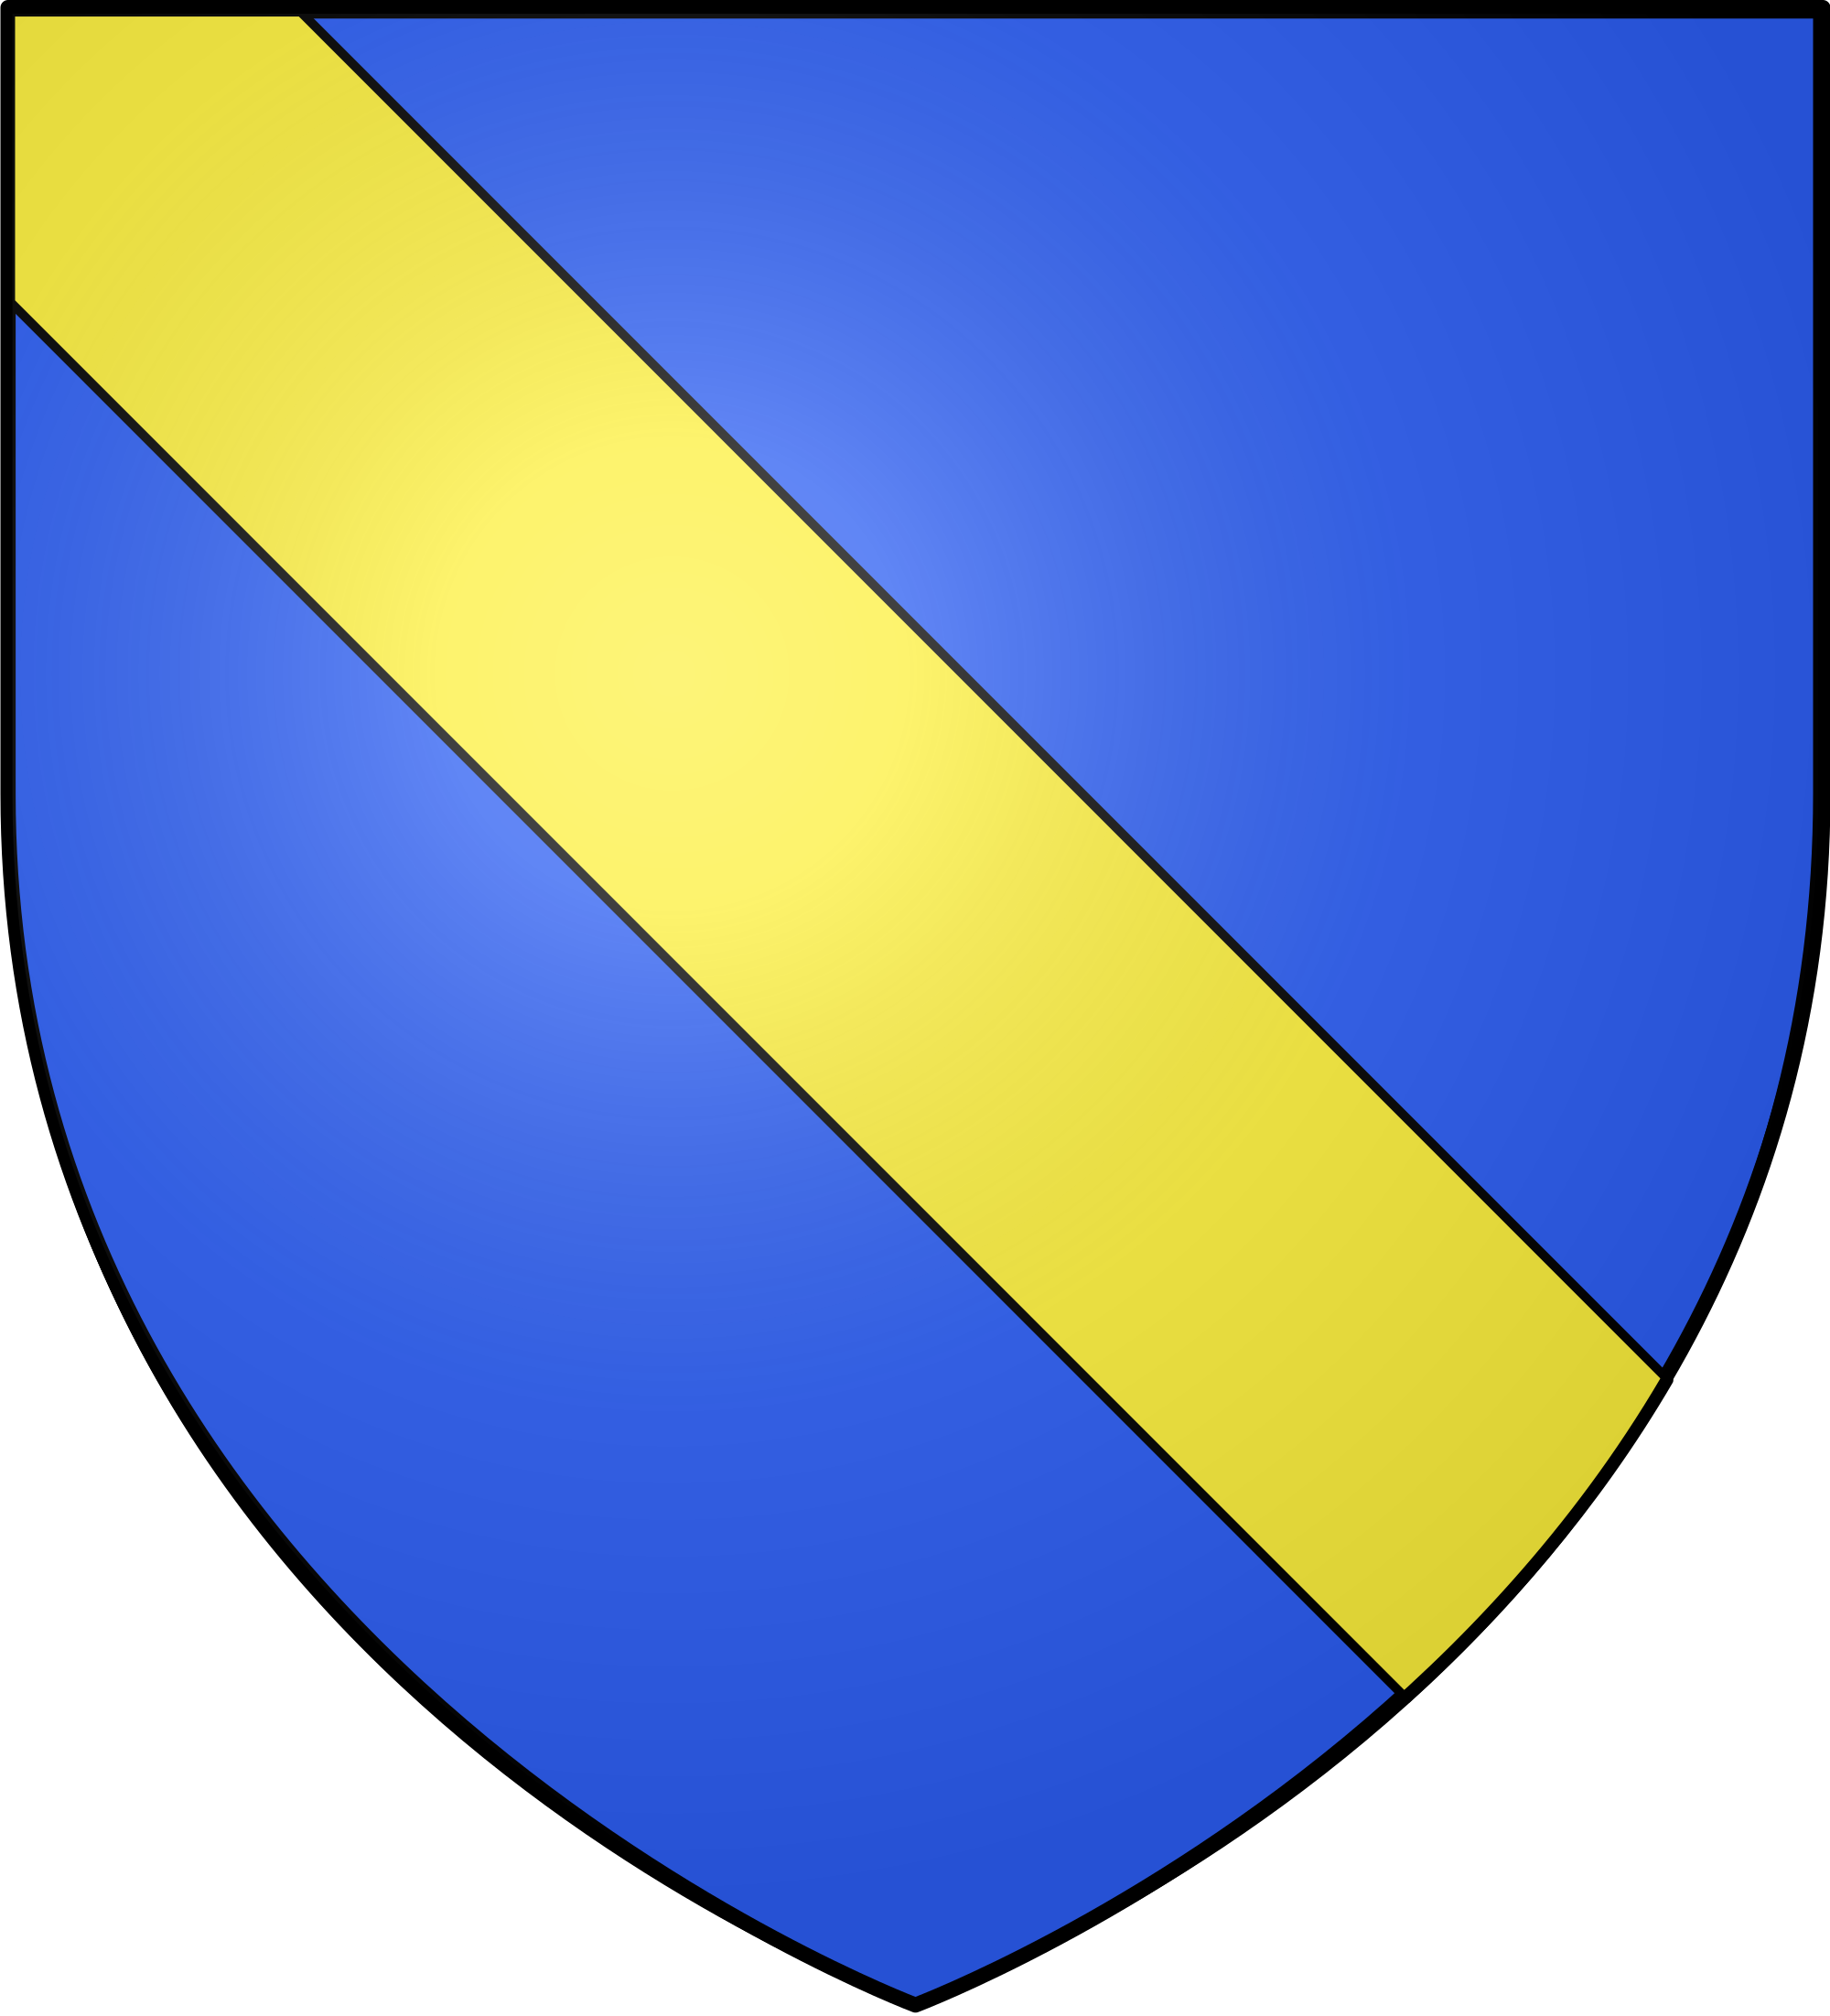 Azure, A Bend Or, Possibly The Most Famous Bend In - Bend Coat Of Arms (2000x2203)